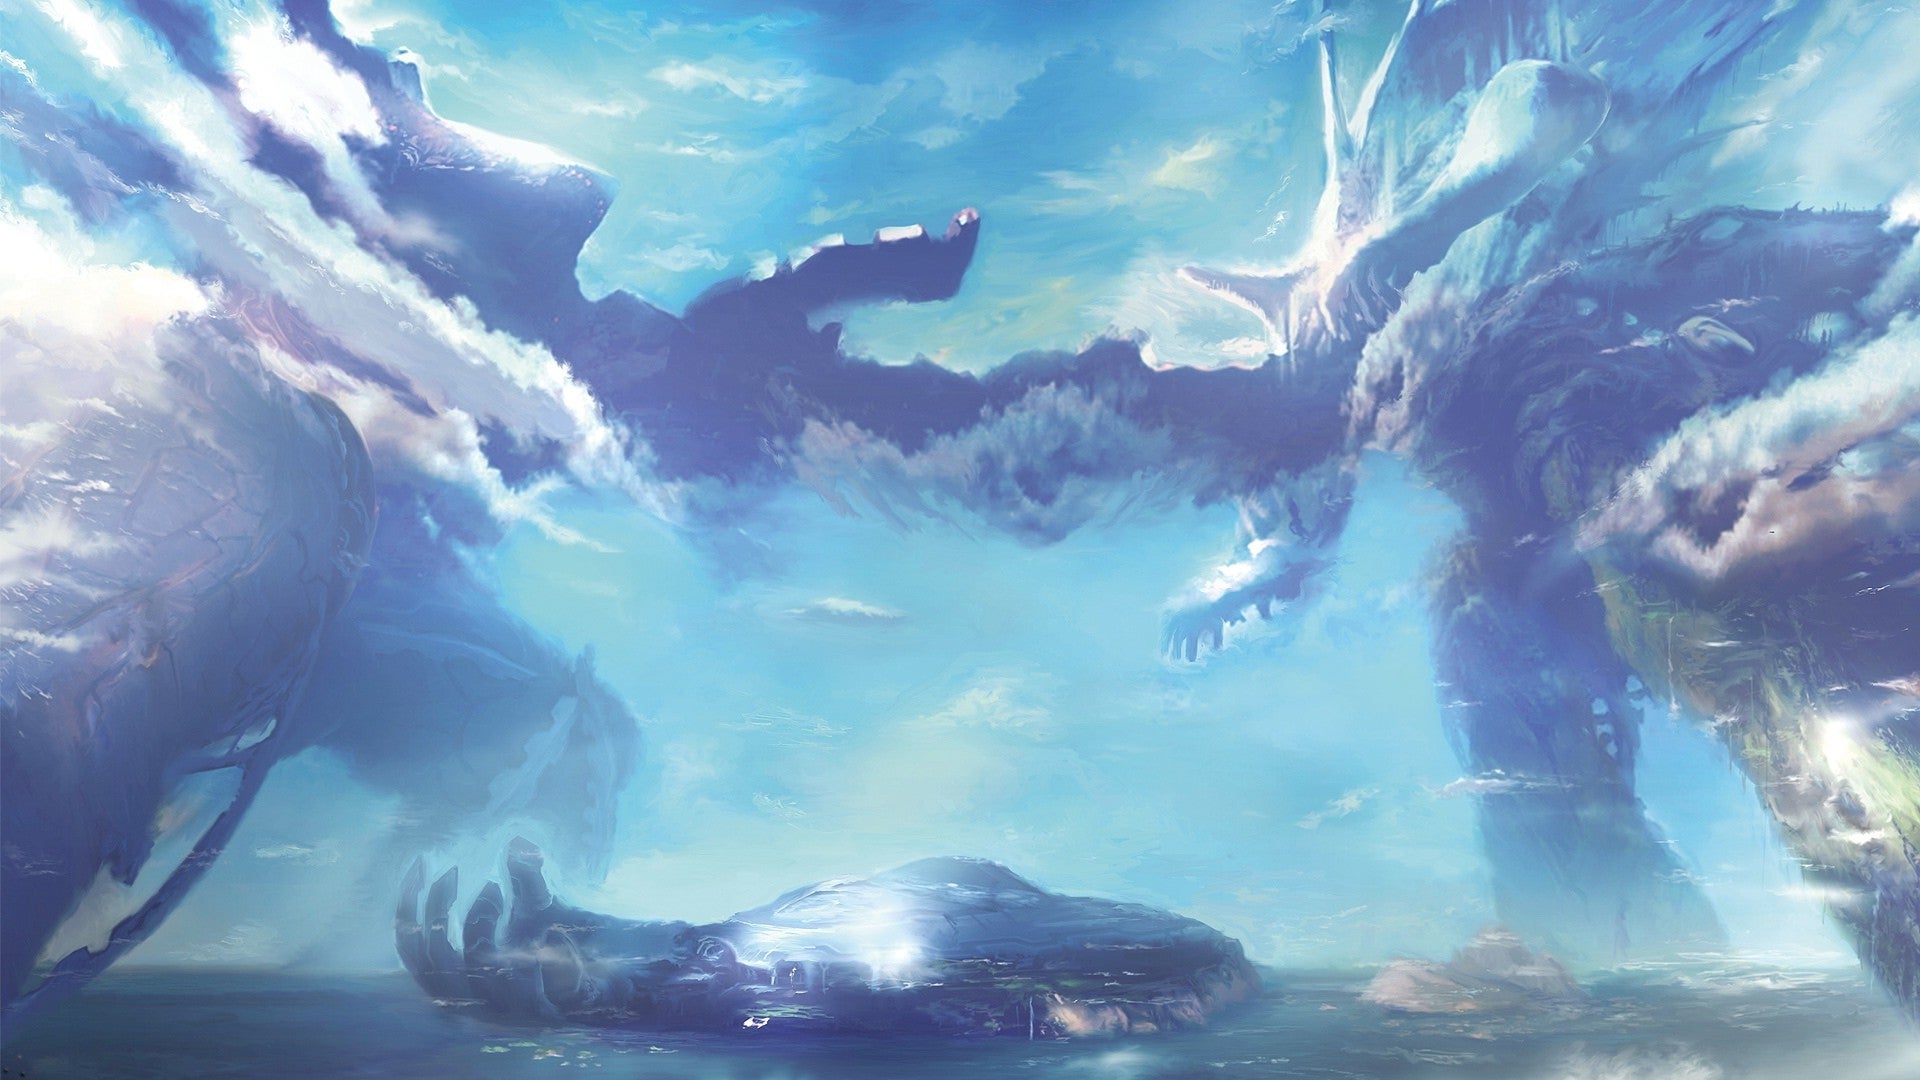 Xenoblade Chronicles 3: A Genius Vision 25 Years In The Making